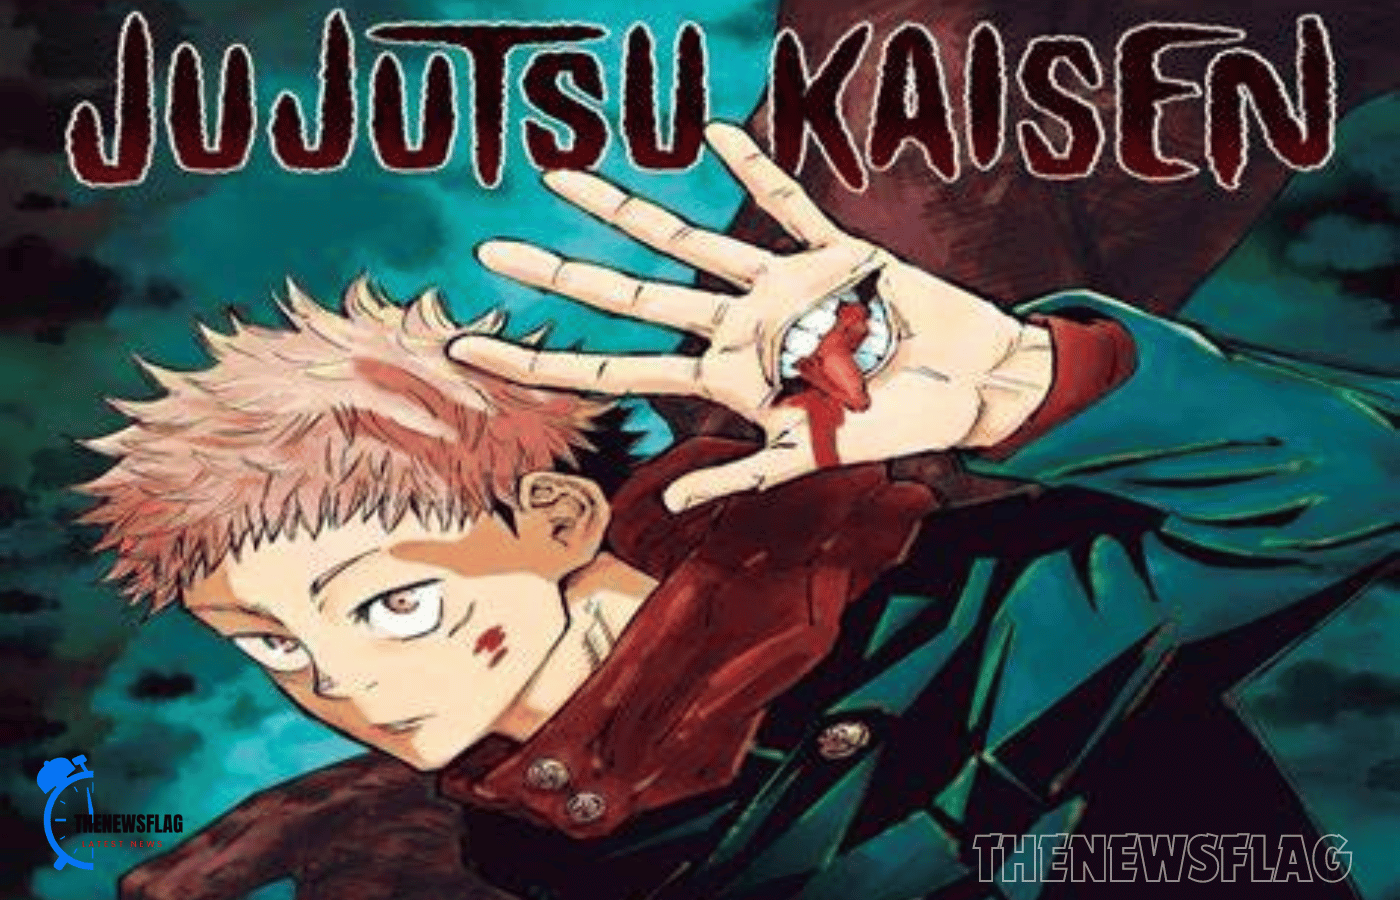 Chapter 254 of Jujutsu Kaisen: What to expect, where to read, and more